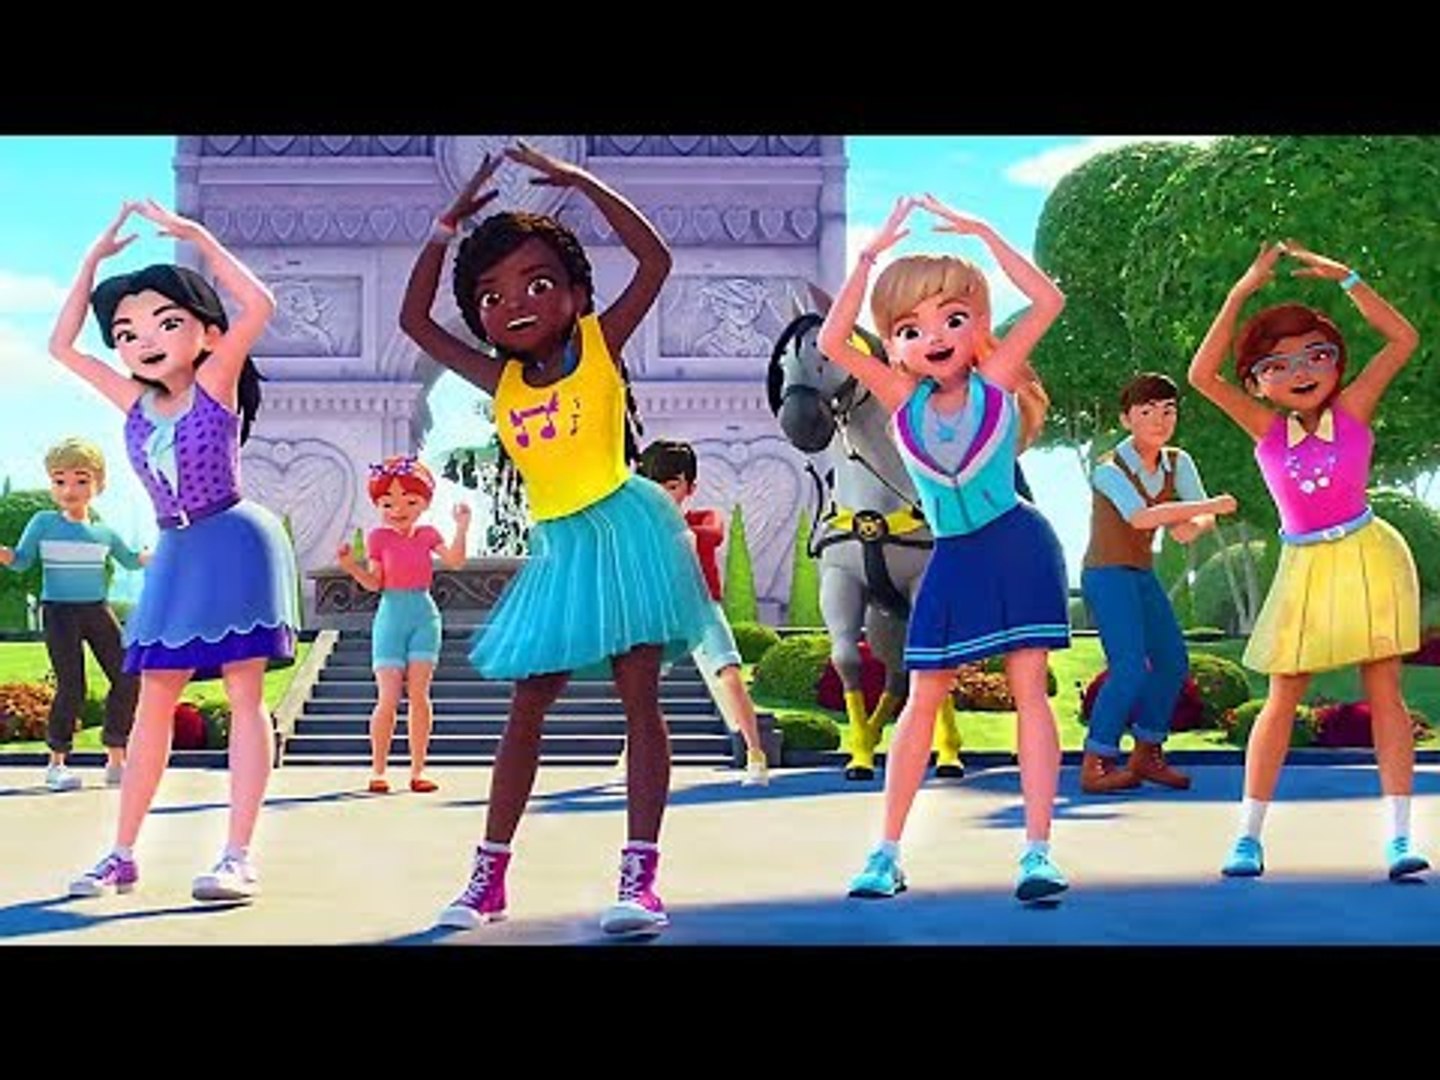 LEGO FRIENDS "We've Got Heart" Song (Dancing Video Clip, Animation) - video  Dailymotion